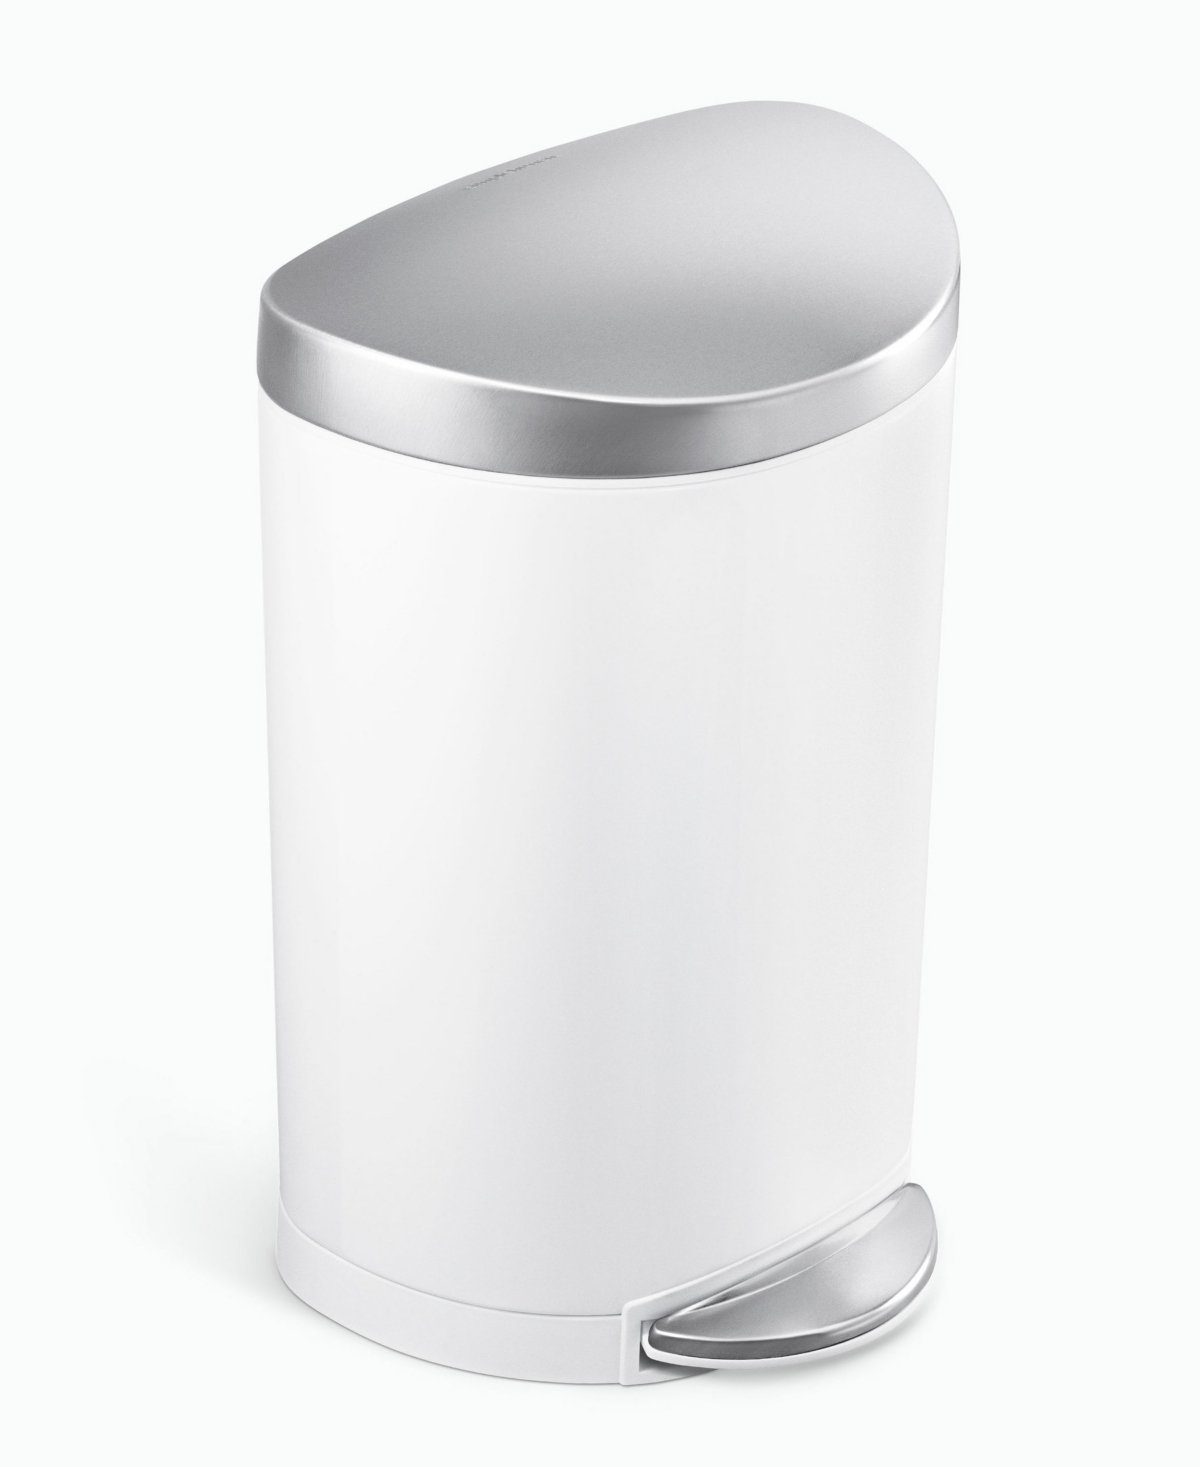 Simplehuman 6 Litre Steel Semi-round Step Can Steel In White Stainless Steel